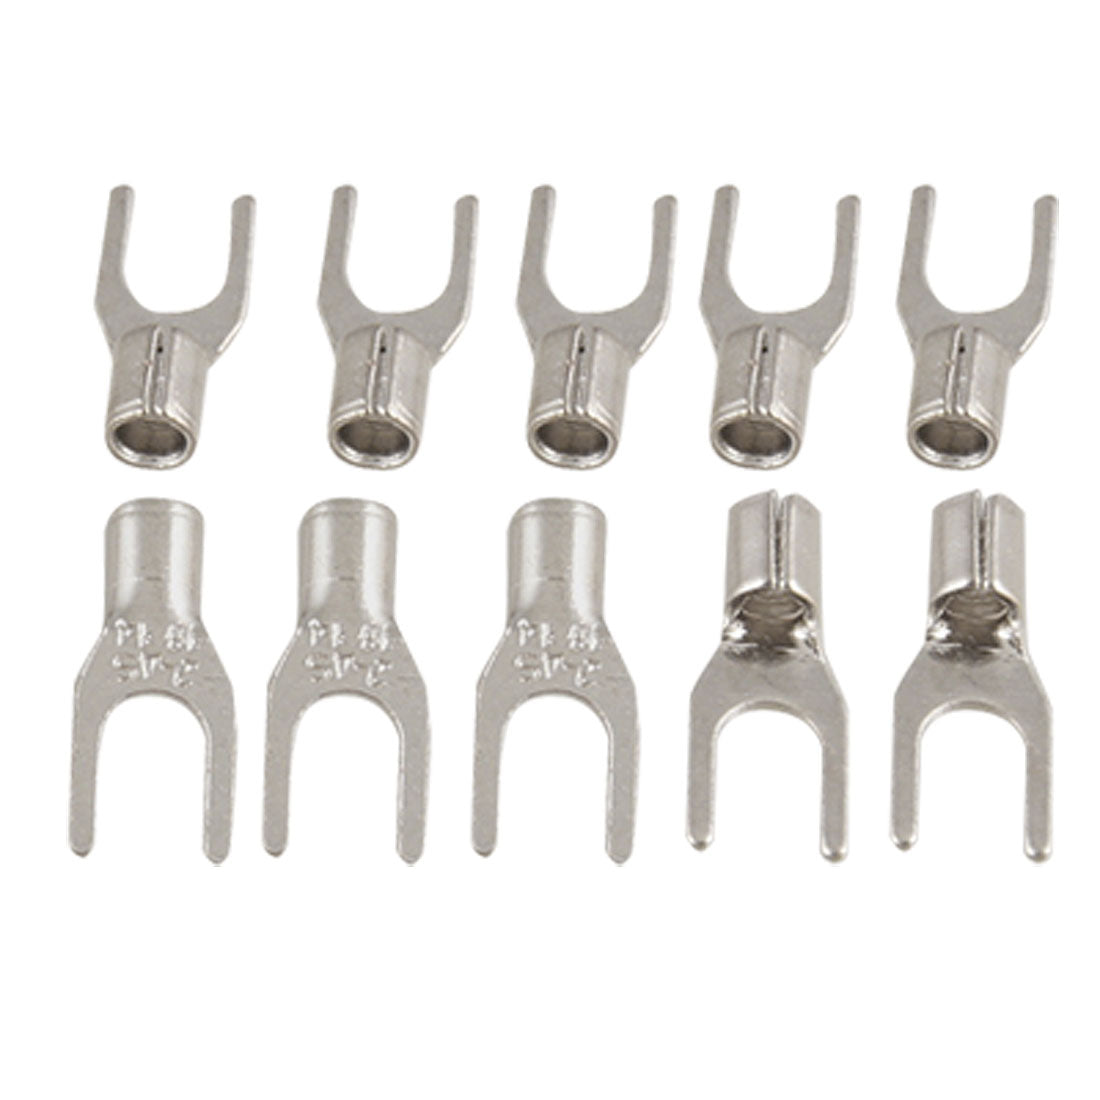 uxcell Uxcell 10 Pcs 4.3mm Uninsulated Crimp Spade Fork Terminal Cable Lug